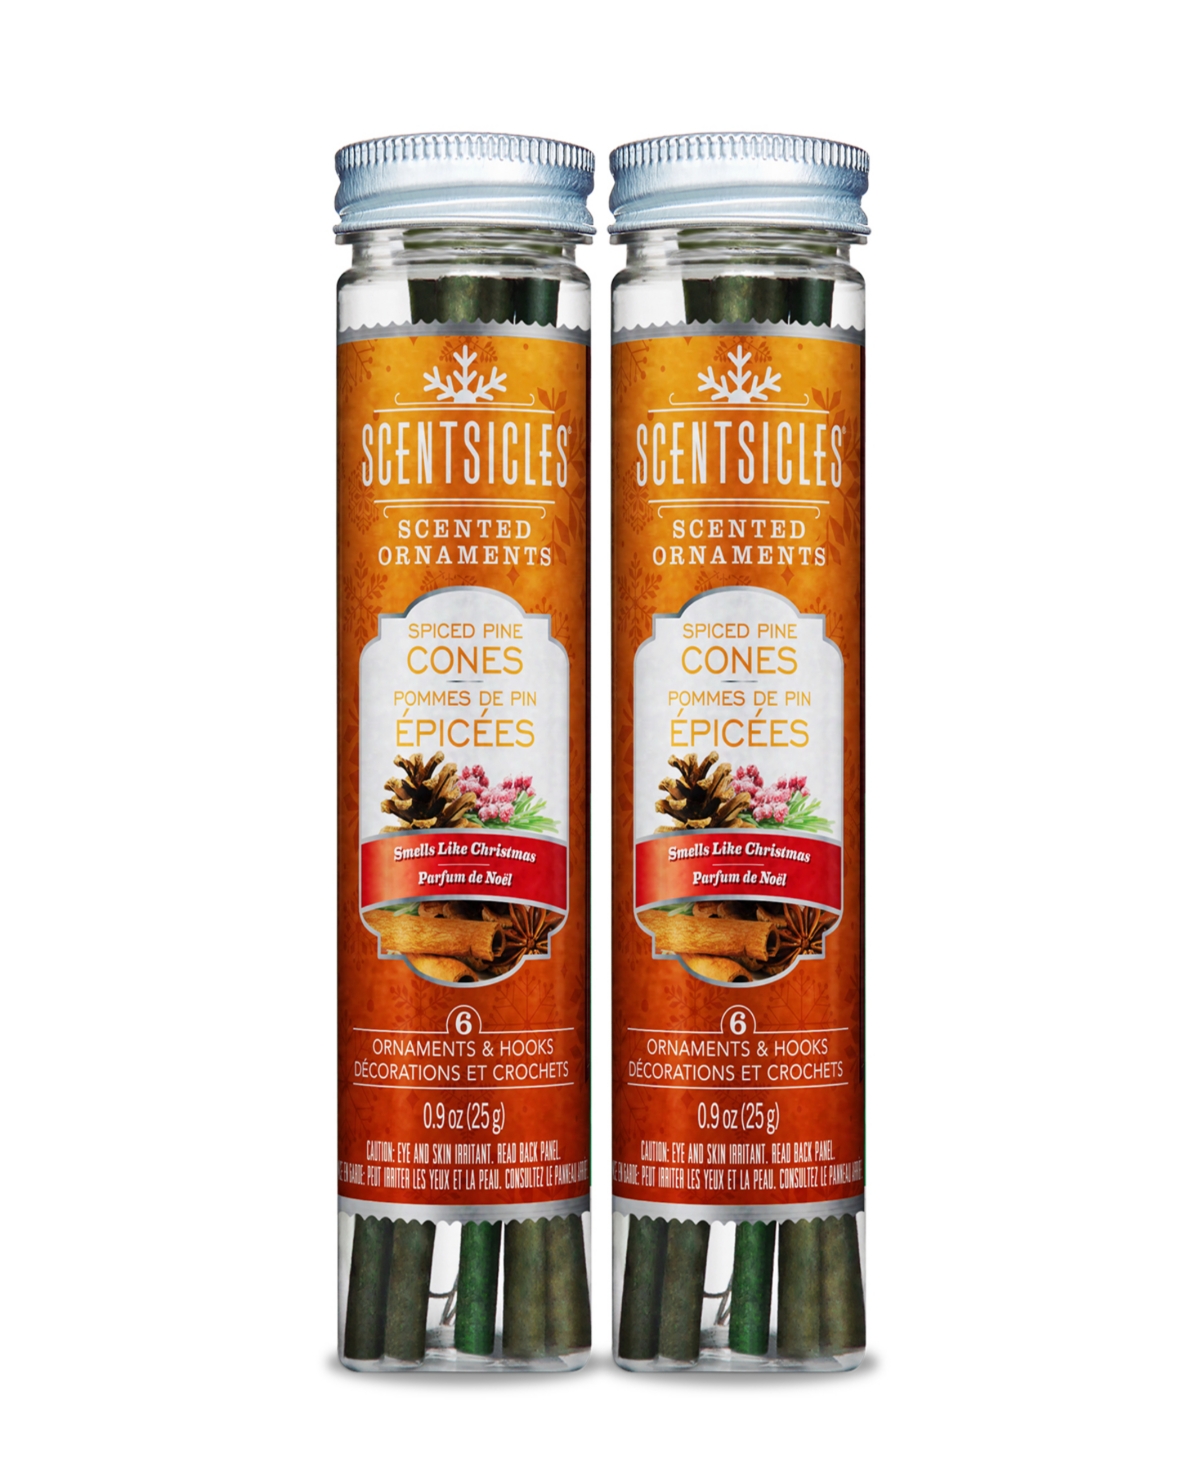 National Tree Company Scentsicles Scented Ornaments, 6 Count Bottles, Infused Paper Sticks, 2 Pack Set In Spiced Pinecones